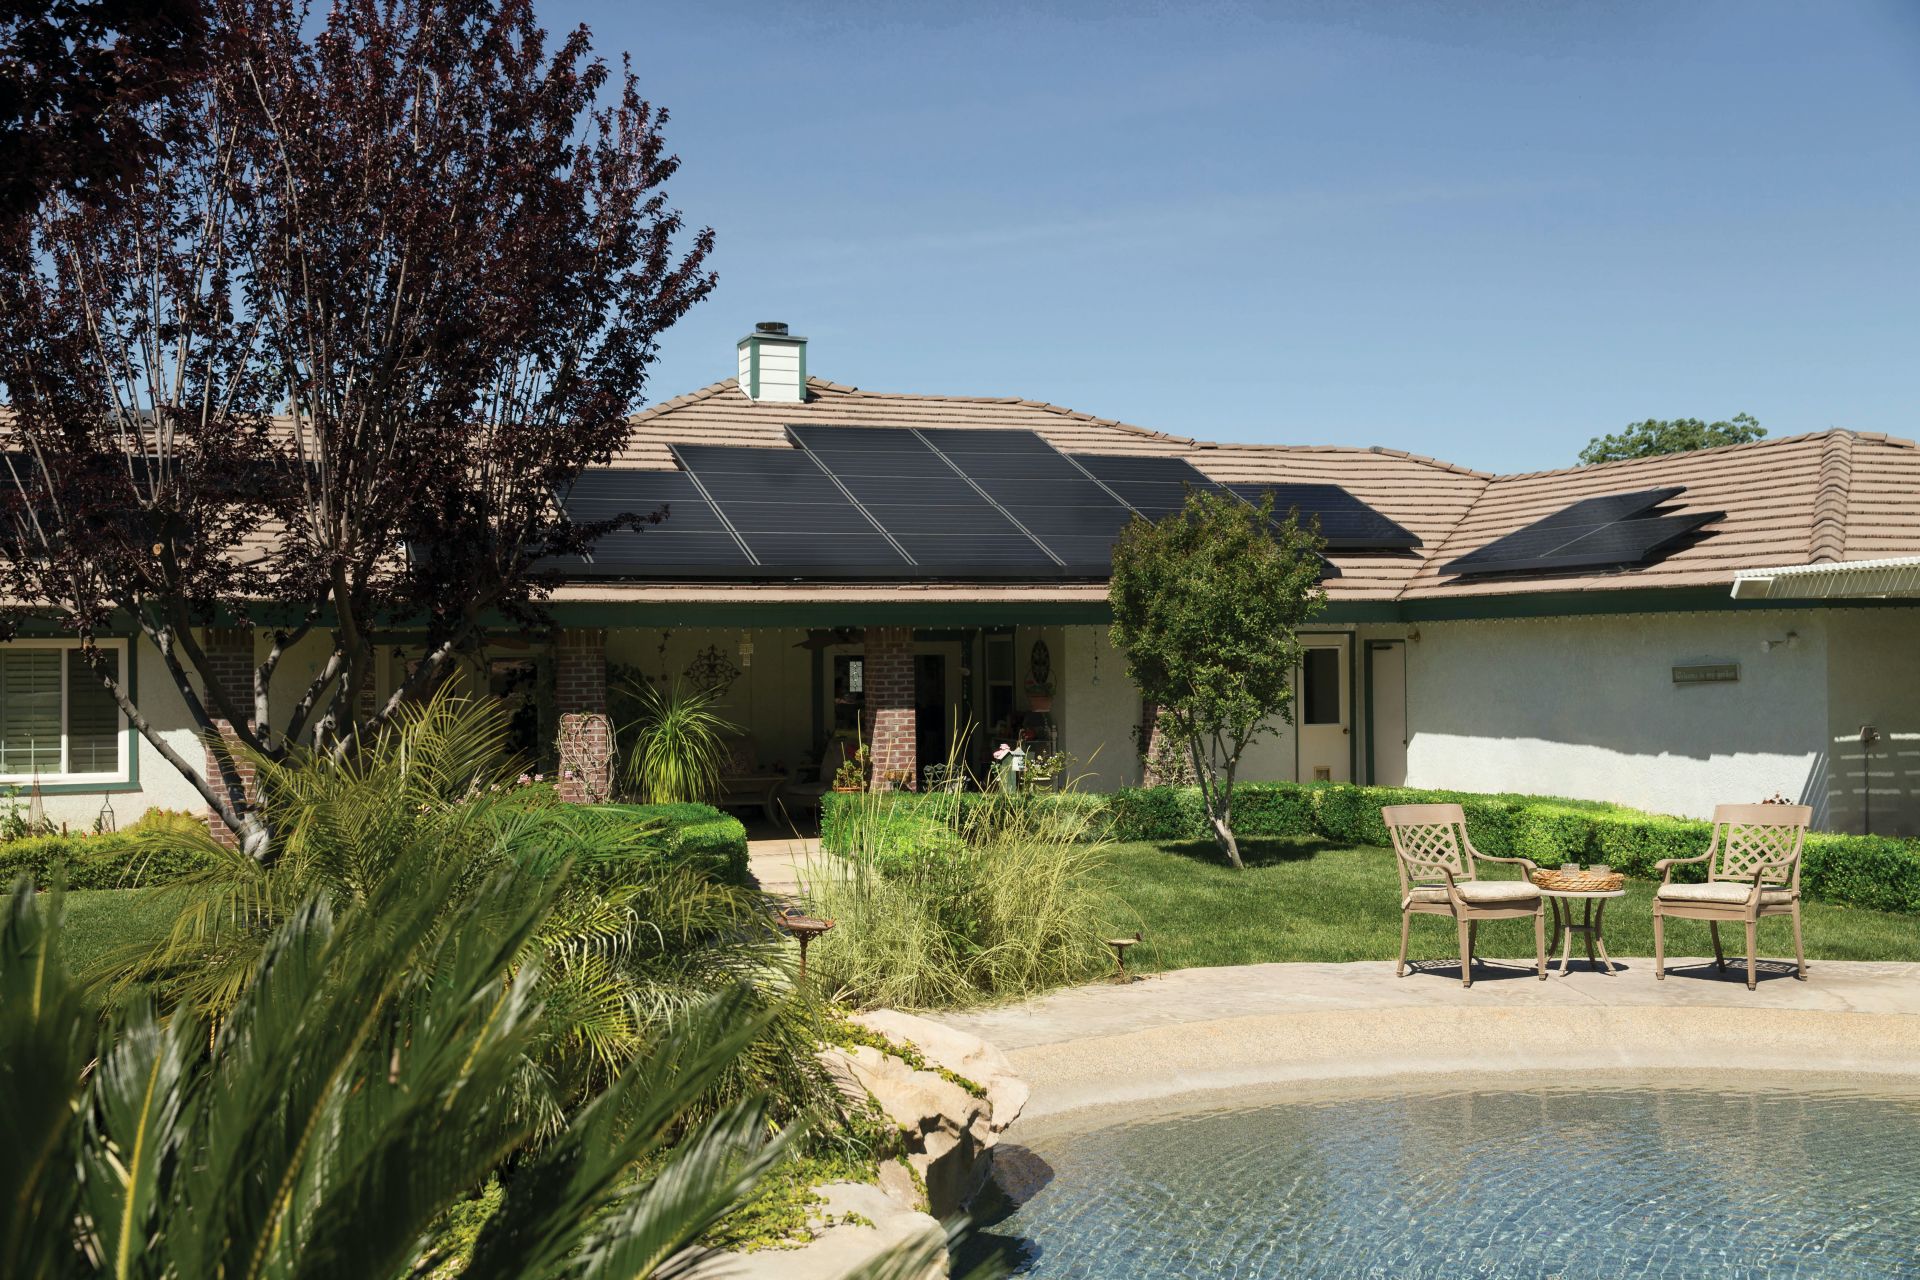 Rooftop Solar Subsidies in the Crosshairs of a Battle &#038; Likely Ending